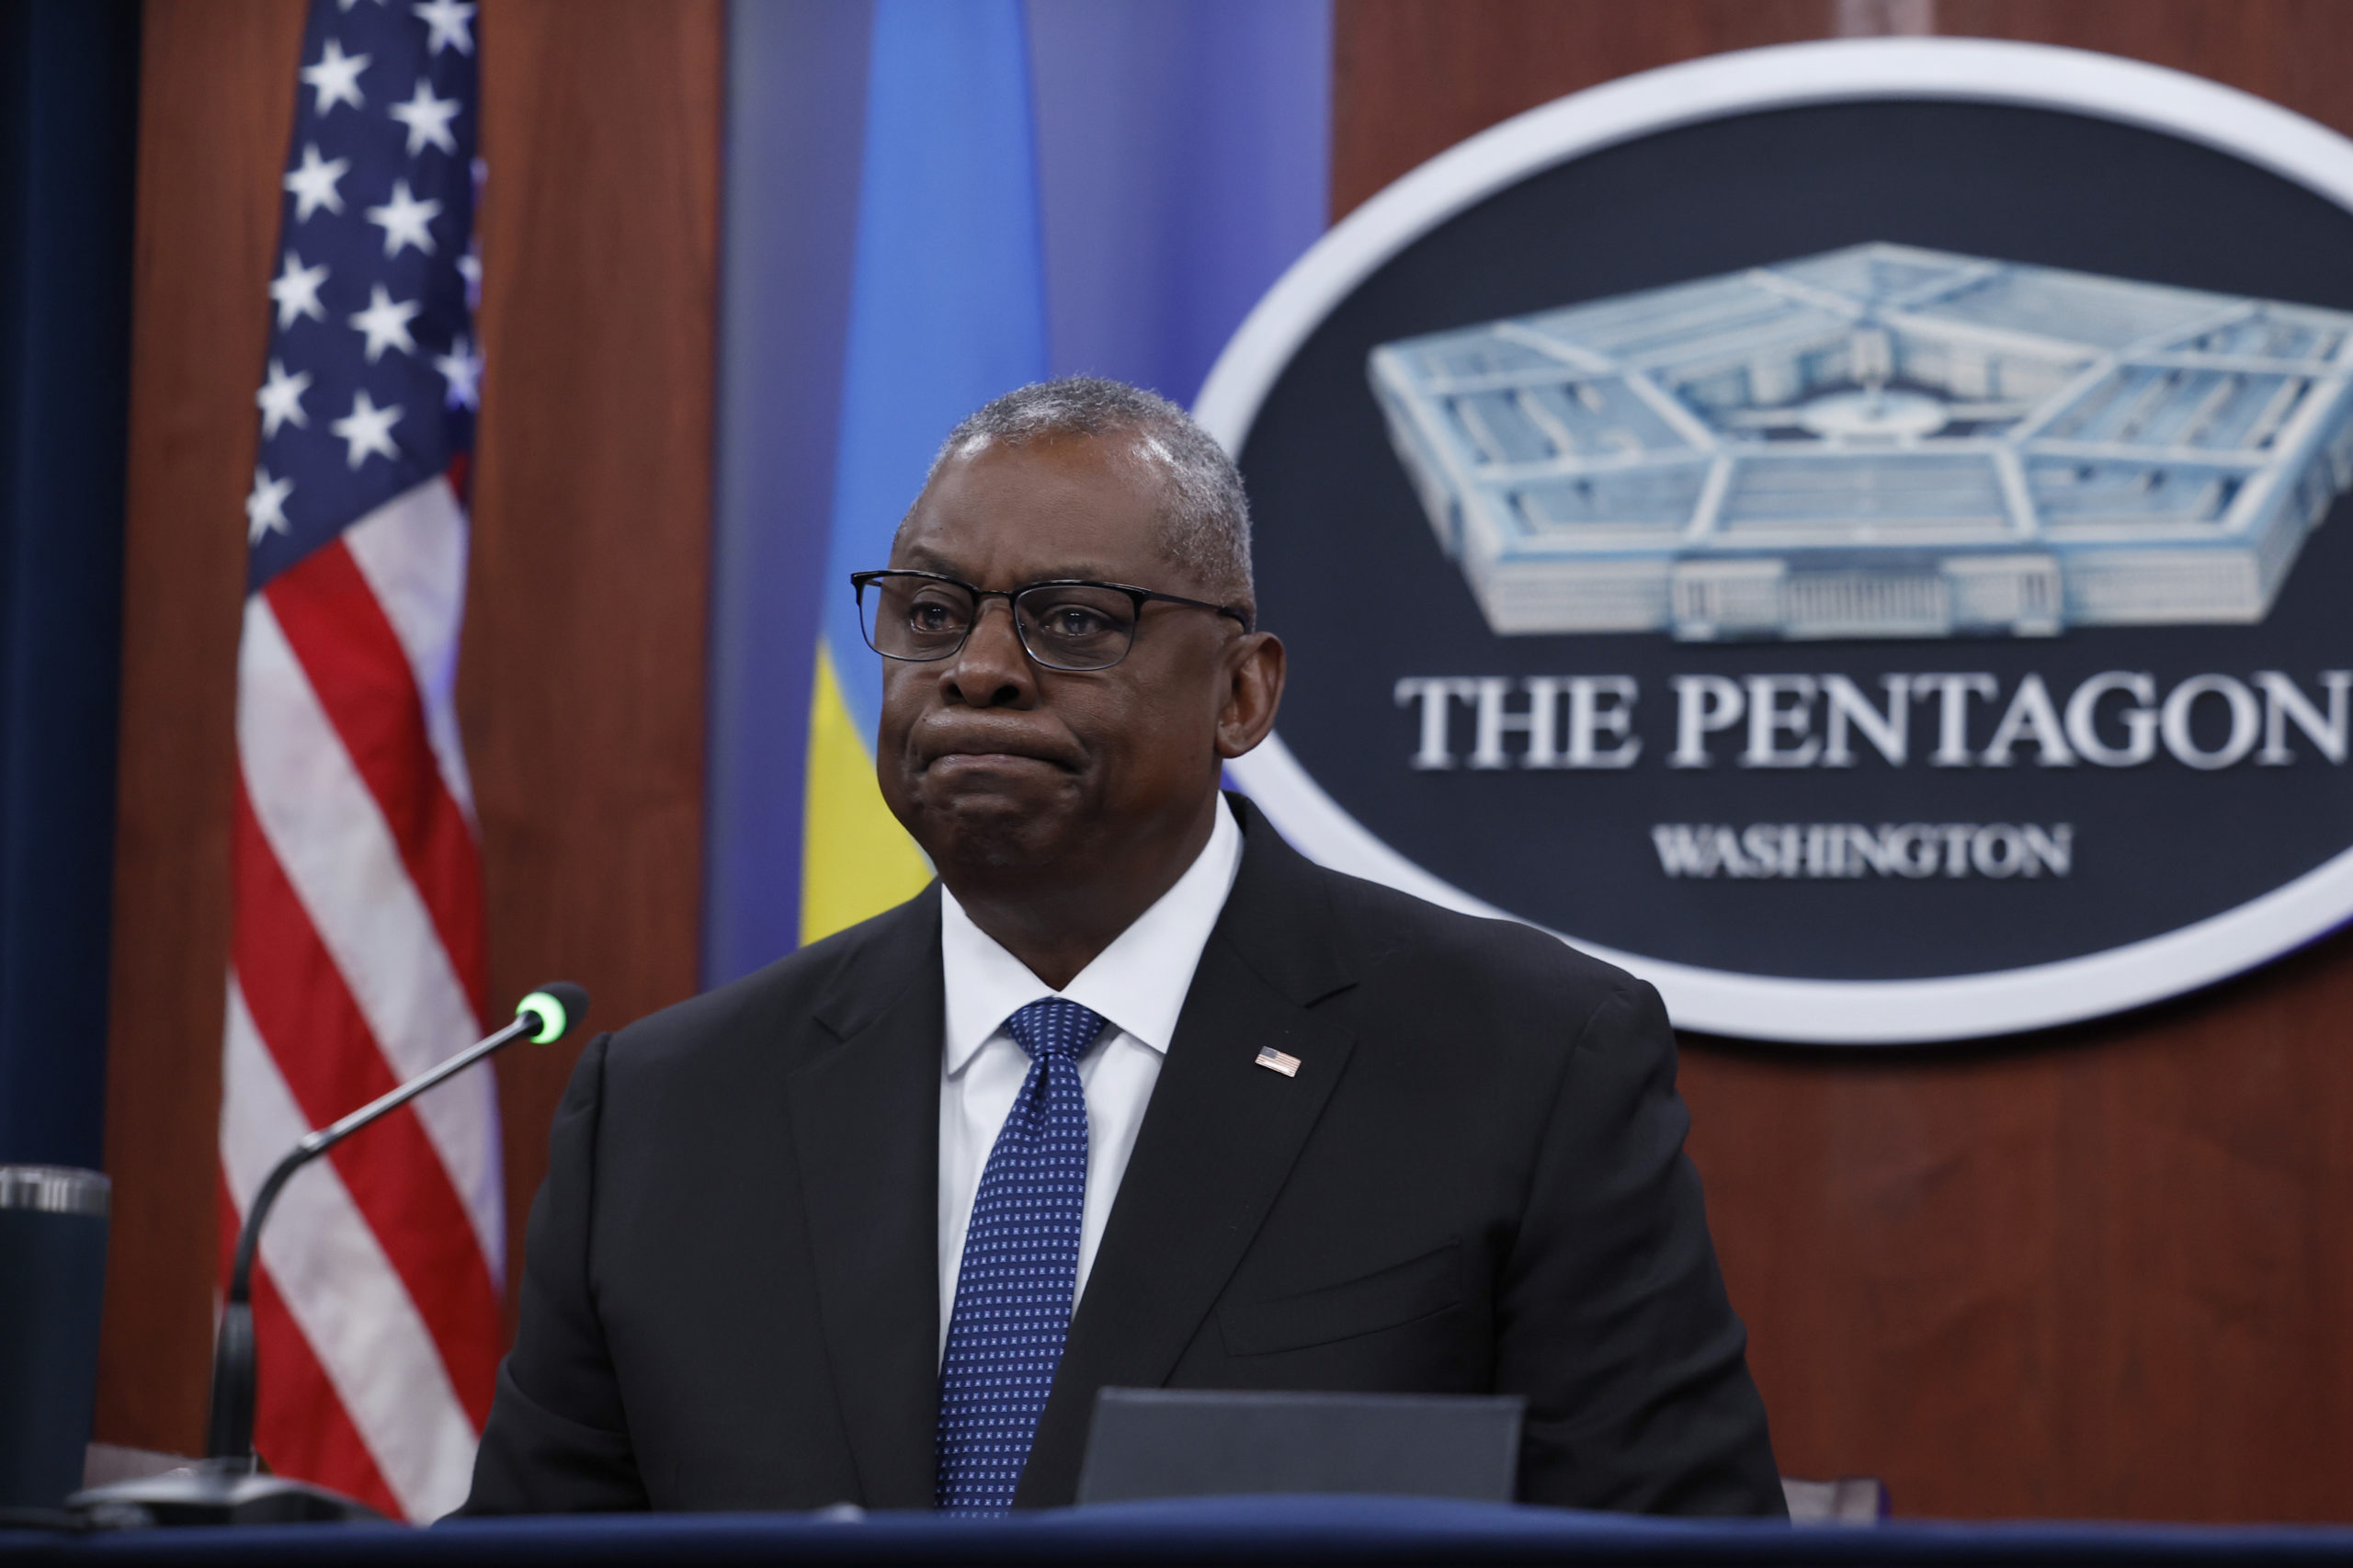 U.S. Secretary of Defense Lloyd Austin speaks during a virtual Ukraine Defense Contact Group (UDCG) meeting at the Pentagon on November 22, 2023 in Arlington, Virginia. Austin gave opening remarks to participating members including foreign ministers and secretary of states. (Photo by Anna Moneymaker/Getty Images)